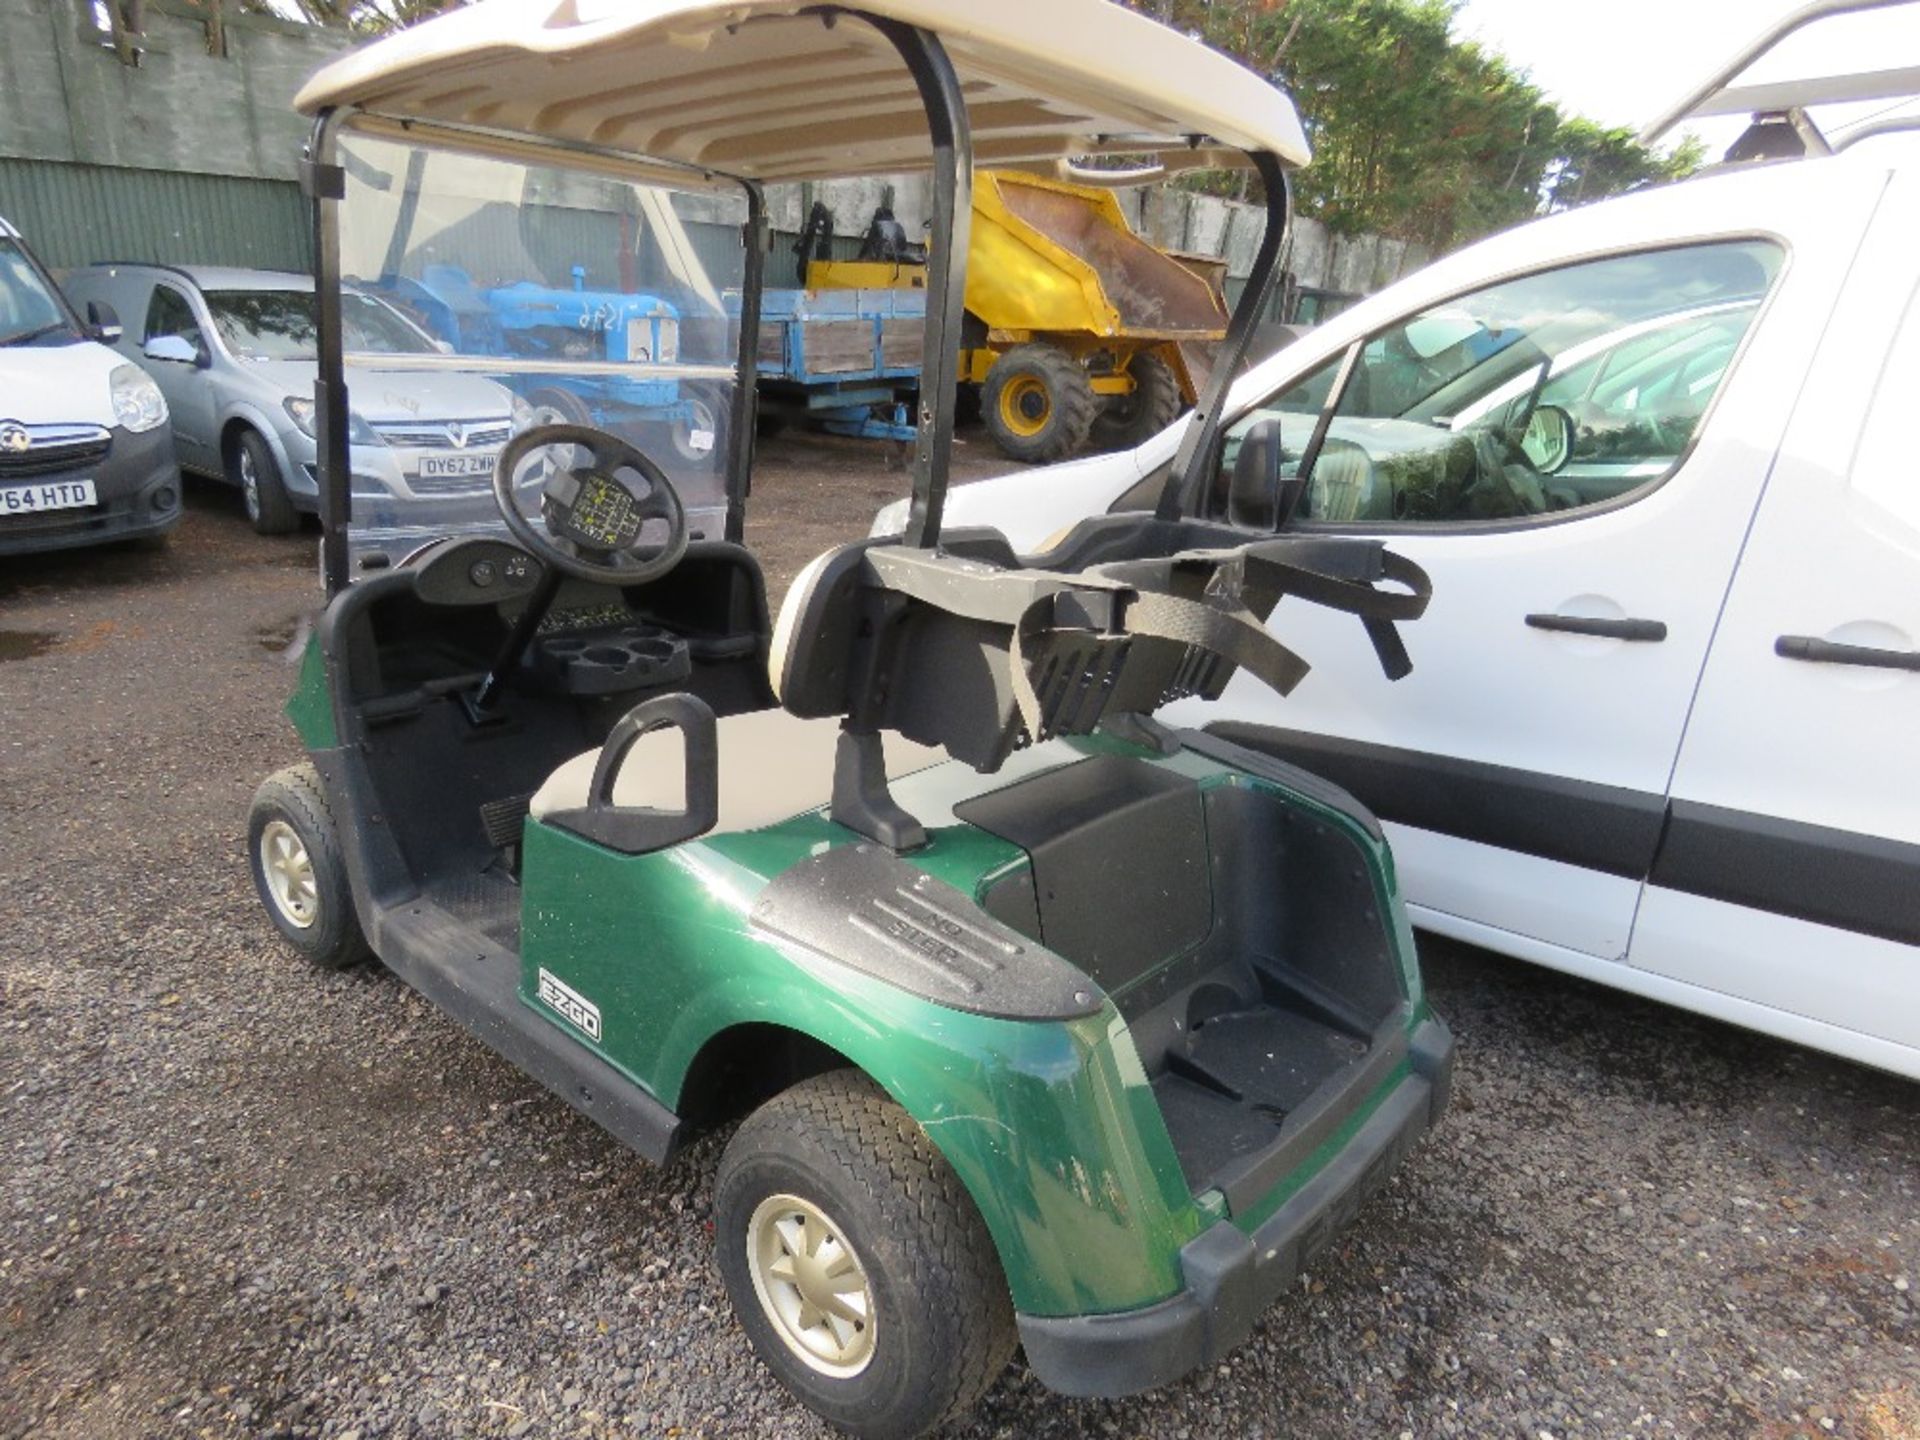 EZGO BATTERY POWERED GOLF BUGGY, YEAR 2013. WHEN TESTED WAS SEEN TO DRIVE, STEER AND BRAKE. WITH KEY - Image 3 of 6